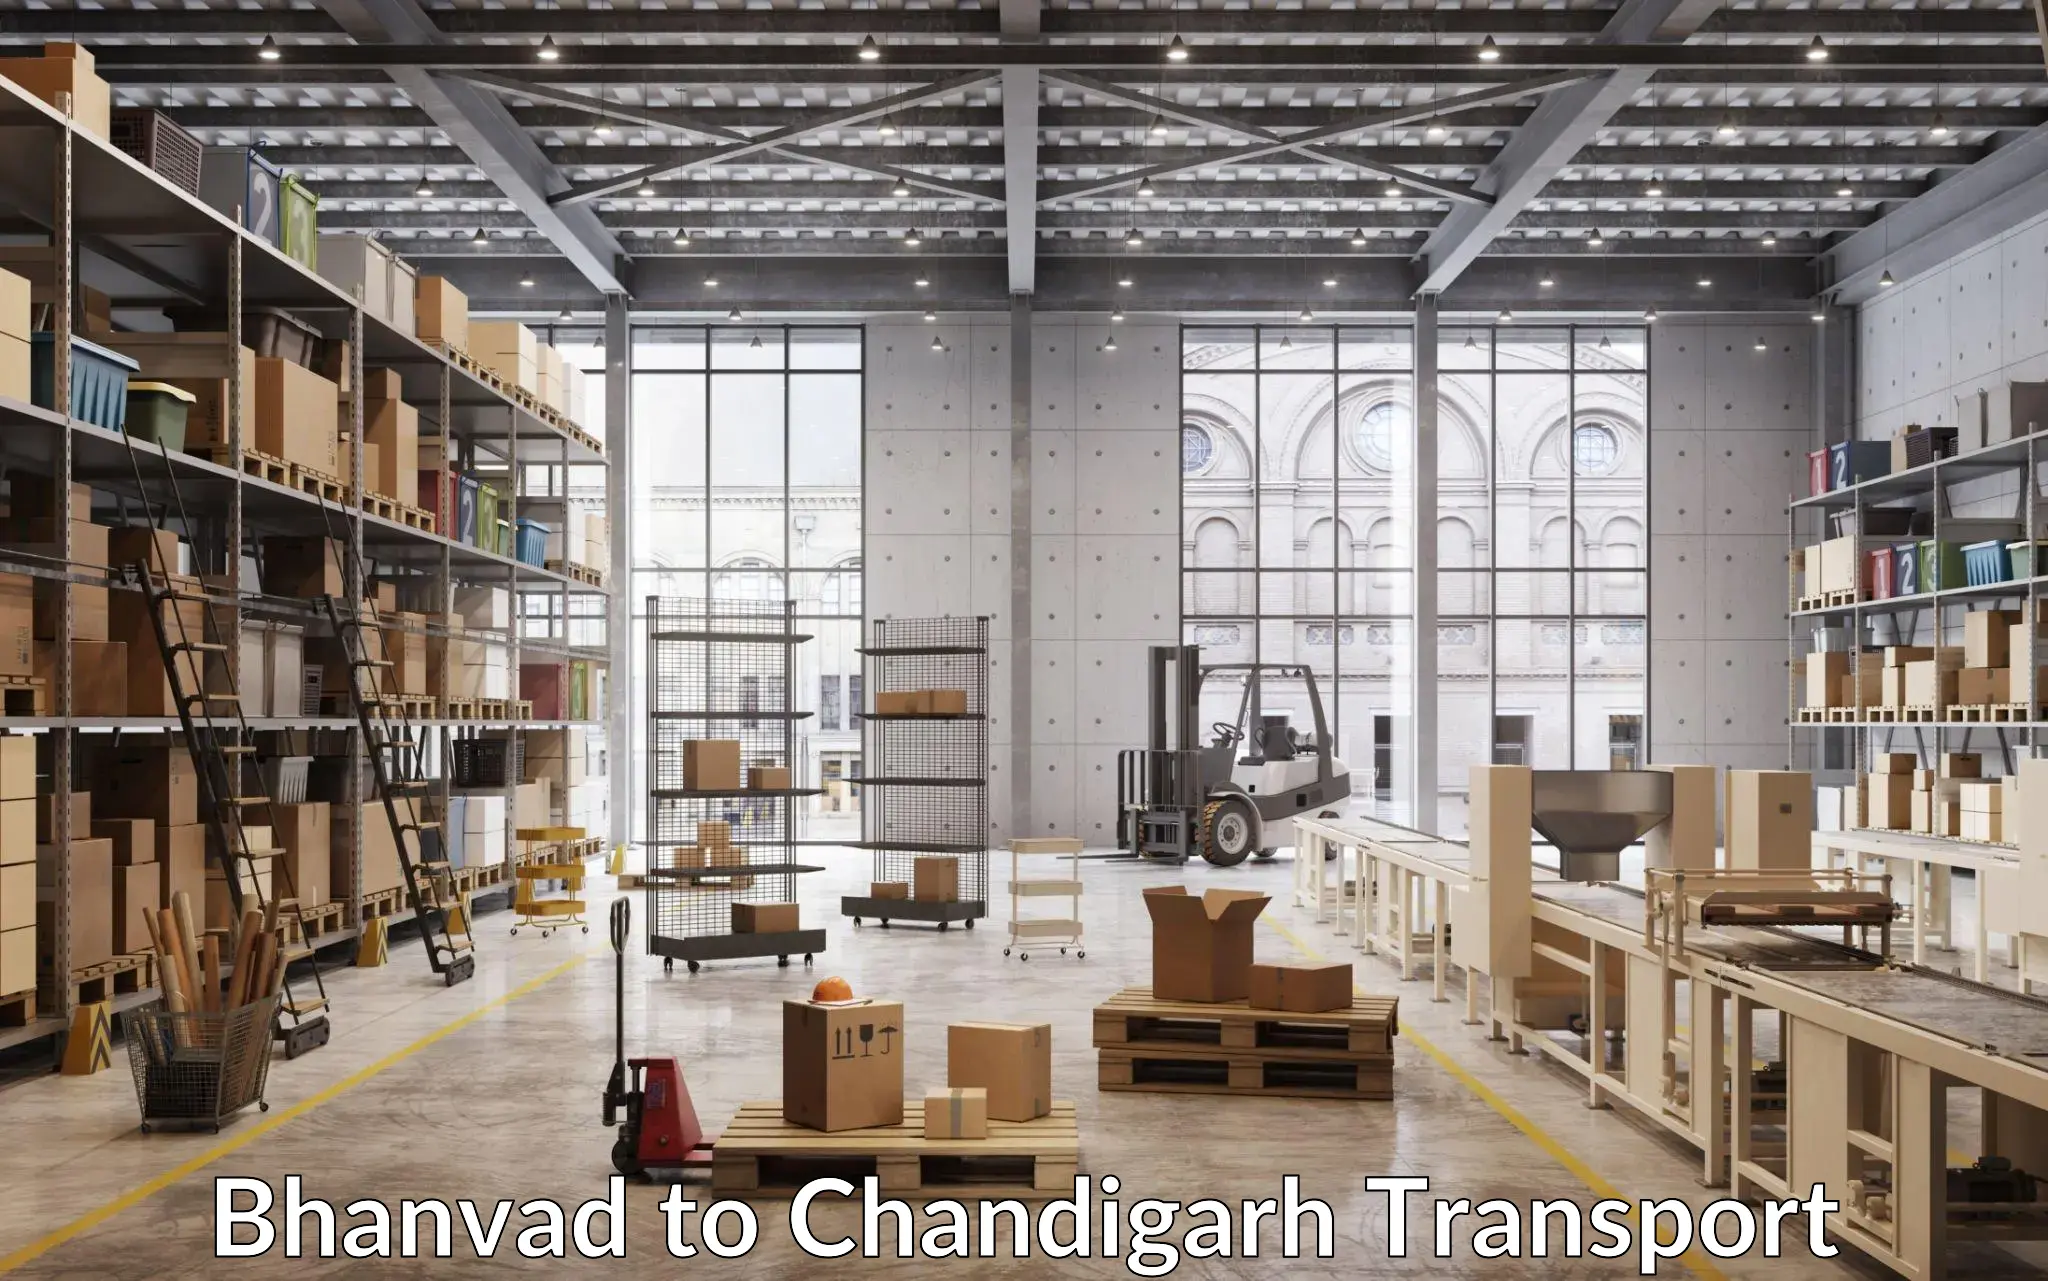 Express transport services Bhanvad to Chandigarh